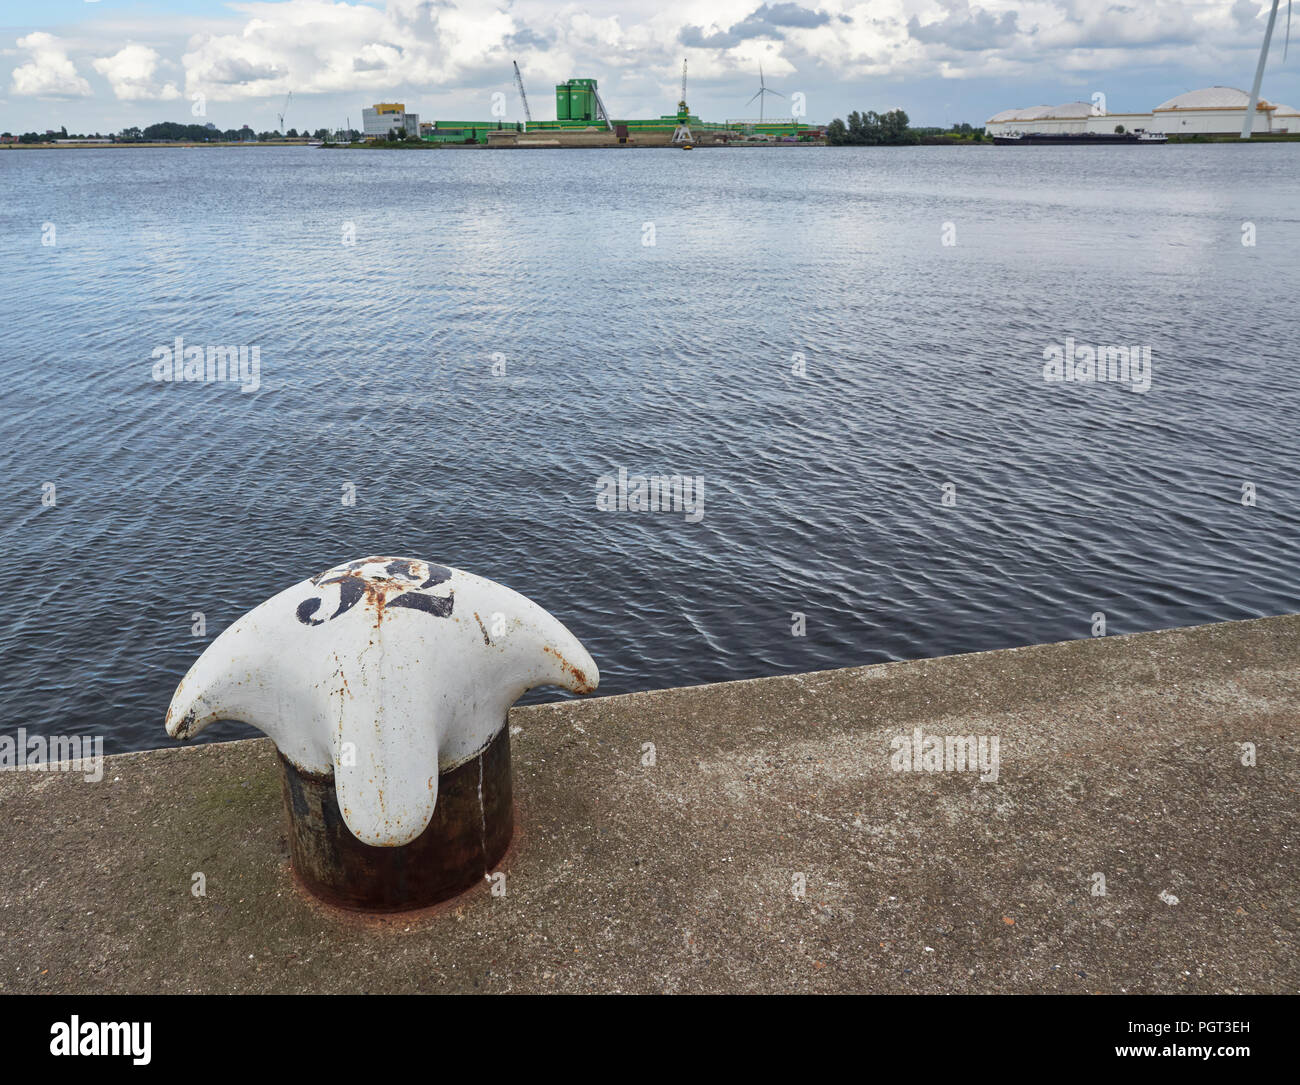 Looking across the North Sea Canal at the Liquid Storage Tanks and an Agricultural Chemical Complex in Den Haag Port near to Amsterdam, Holland. Stock Photo